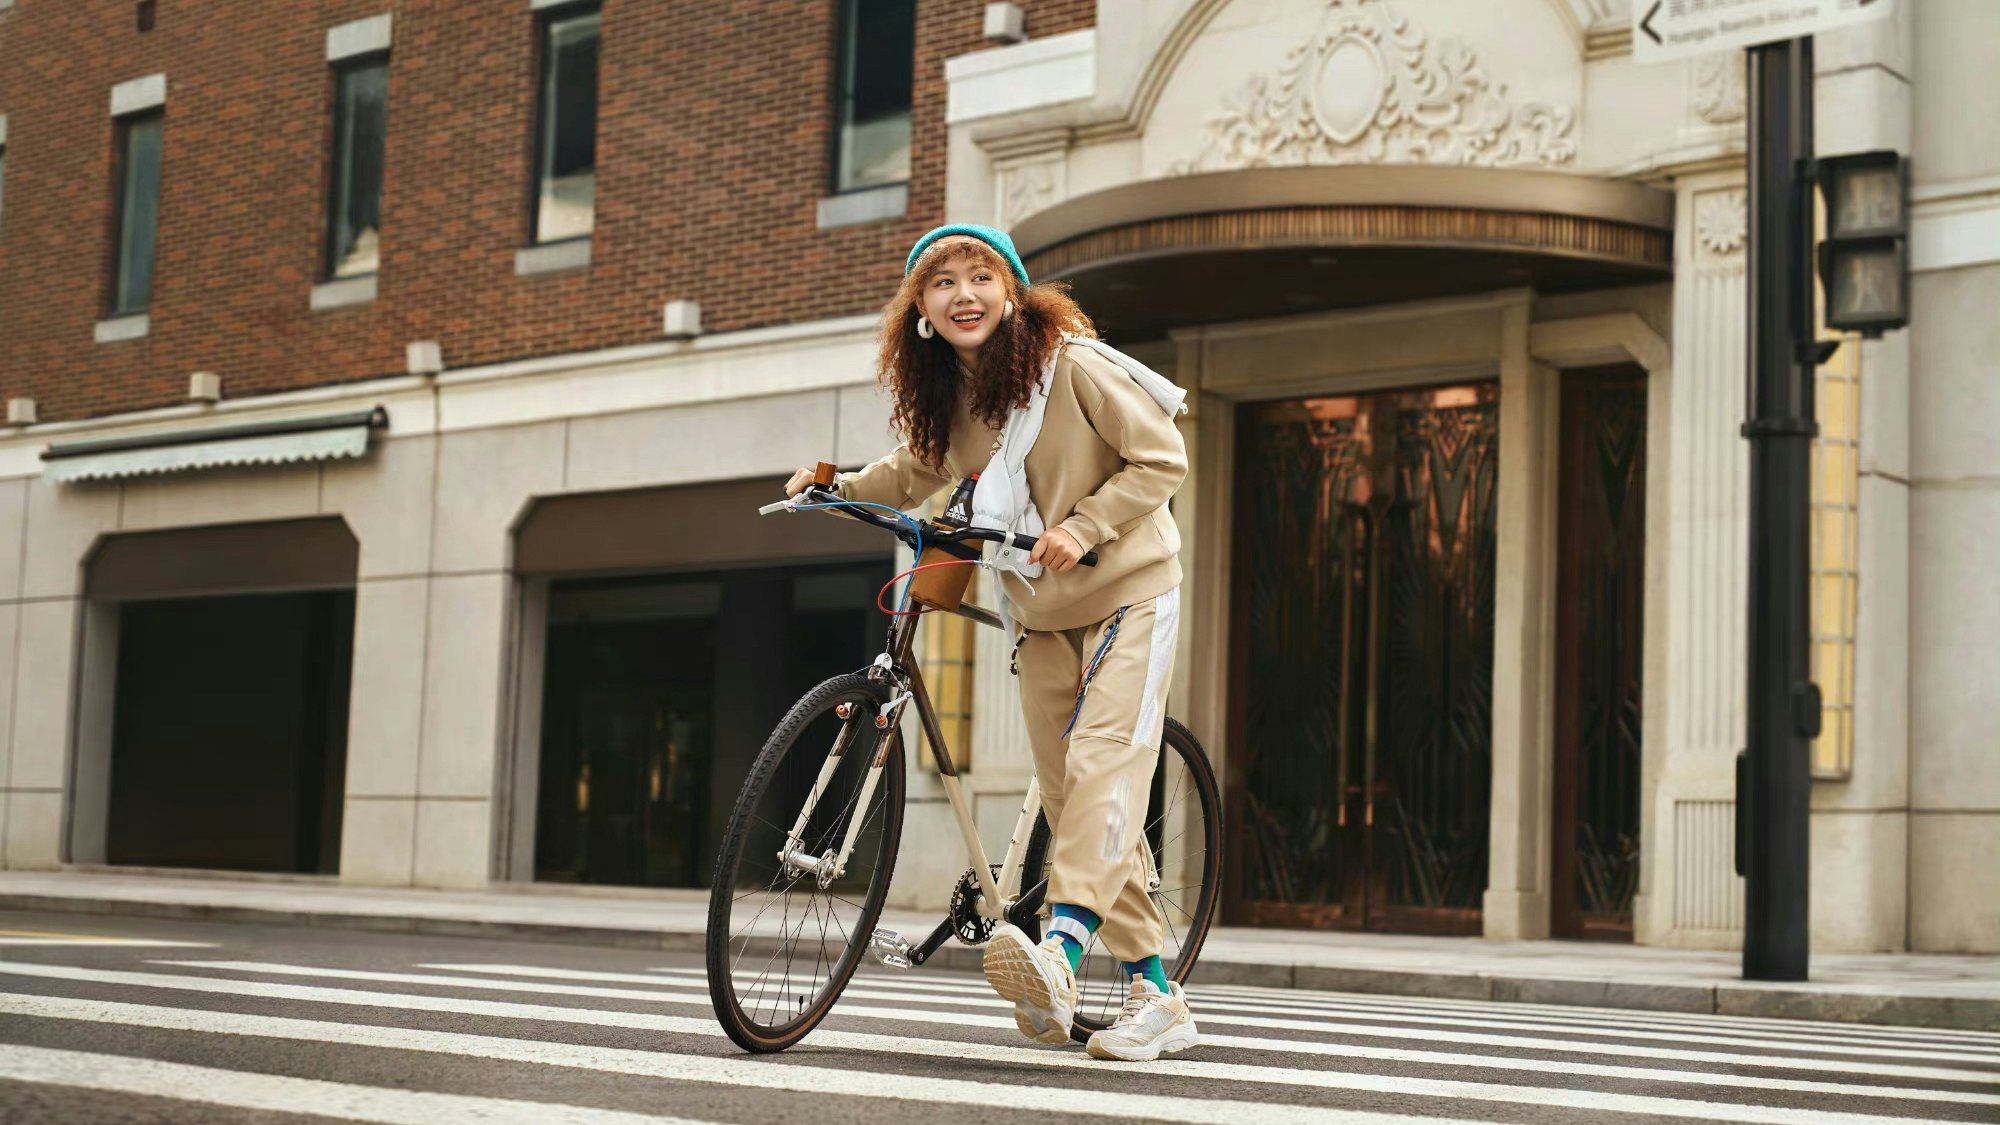 As China's Gen Z recognize that health is wealth during the pandemic, outdoor activities and indoor fitness have become much more than pastimes. Photo: Adidas